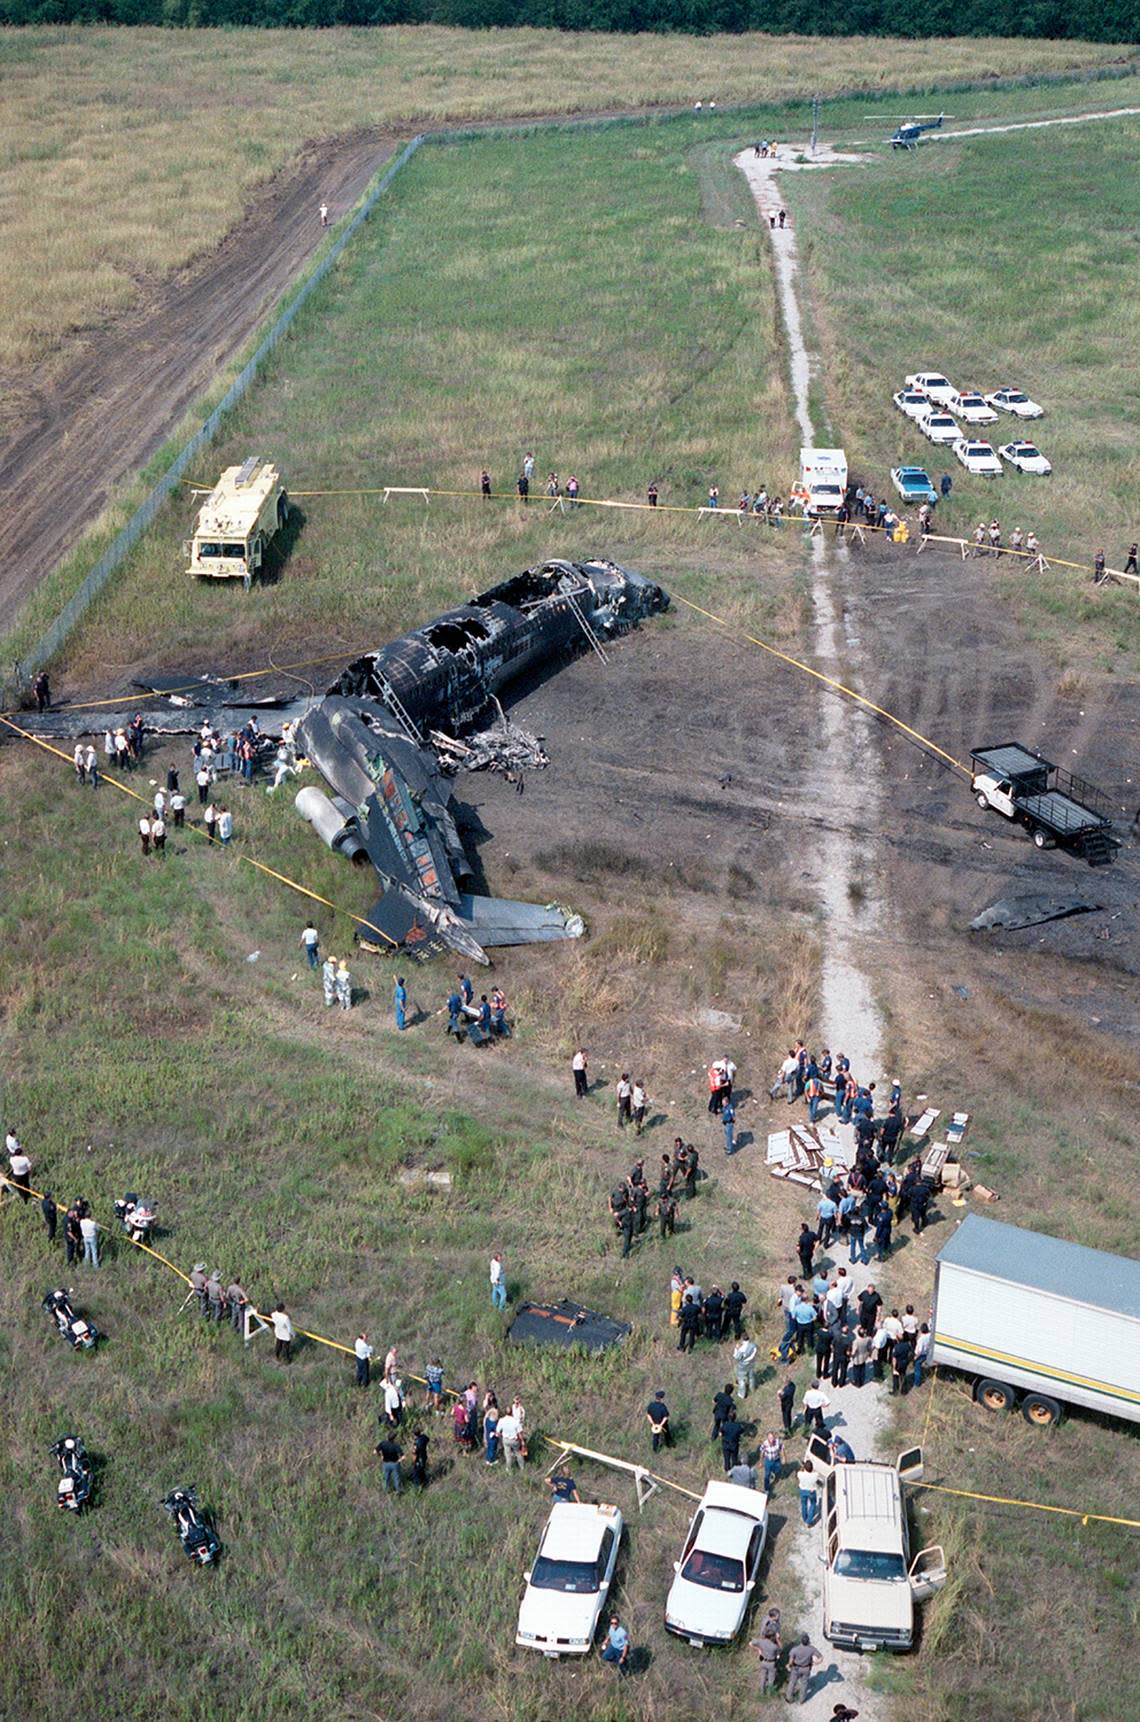 Aug. 31, 1988: Aerial view of the Delta Flight 1141 crash at Dallas-Fort Worth International Airport. The deceased were placed in a makeshift morgue transport truck, set up on site by the Tarrant County Medical Examiner’s Office. Twelve passengers and two crew members perished.